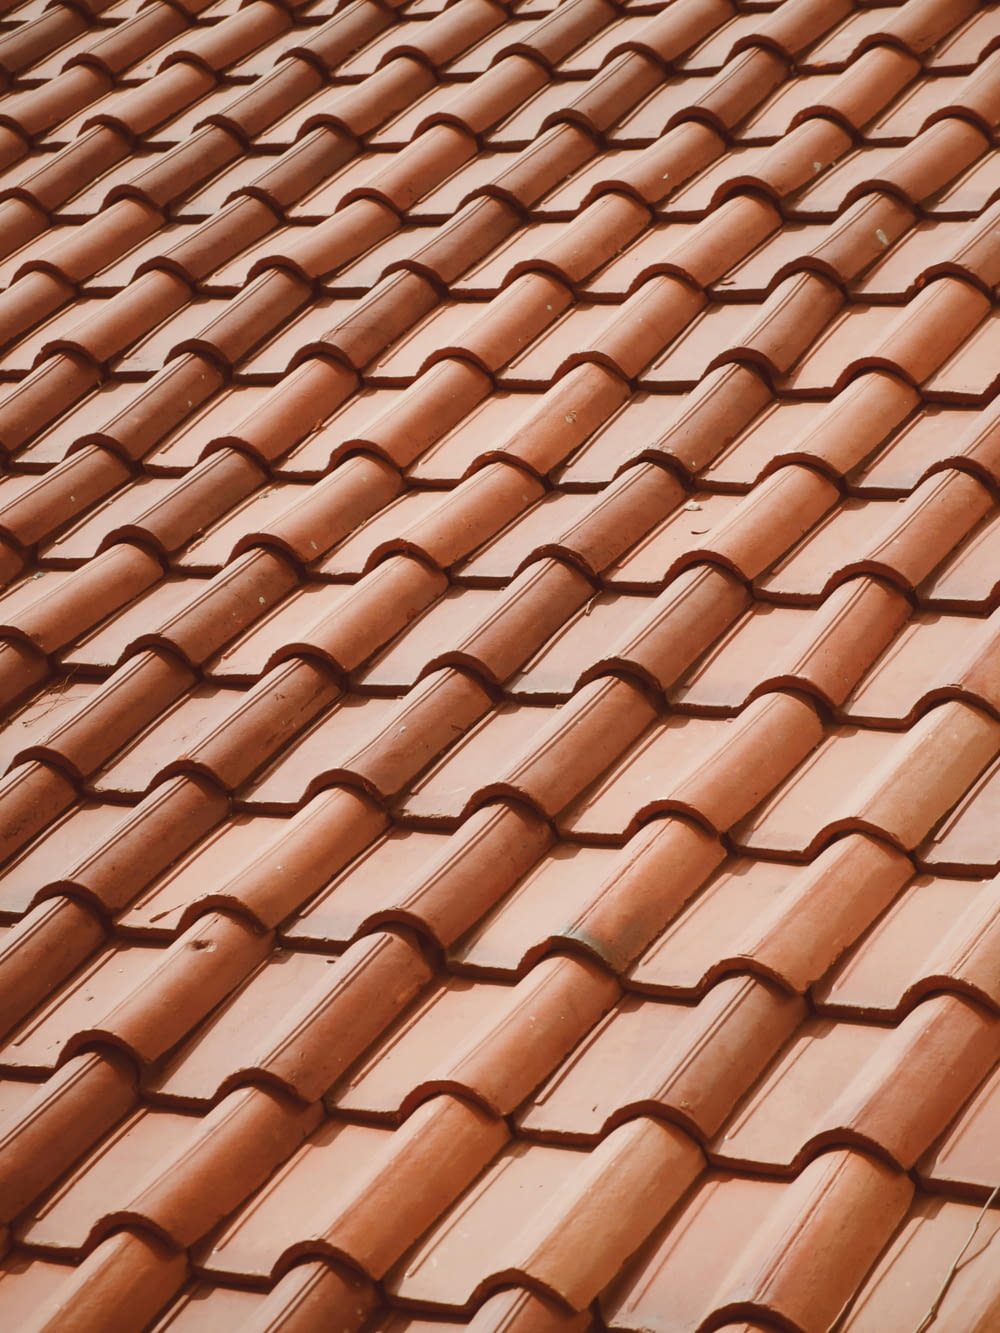 a close up of a roof with a red tile pattern